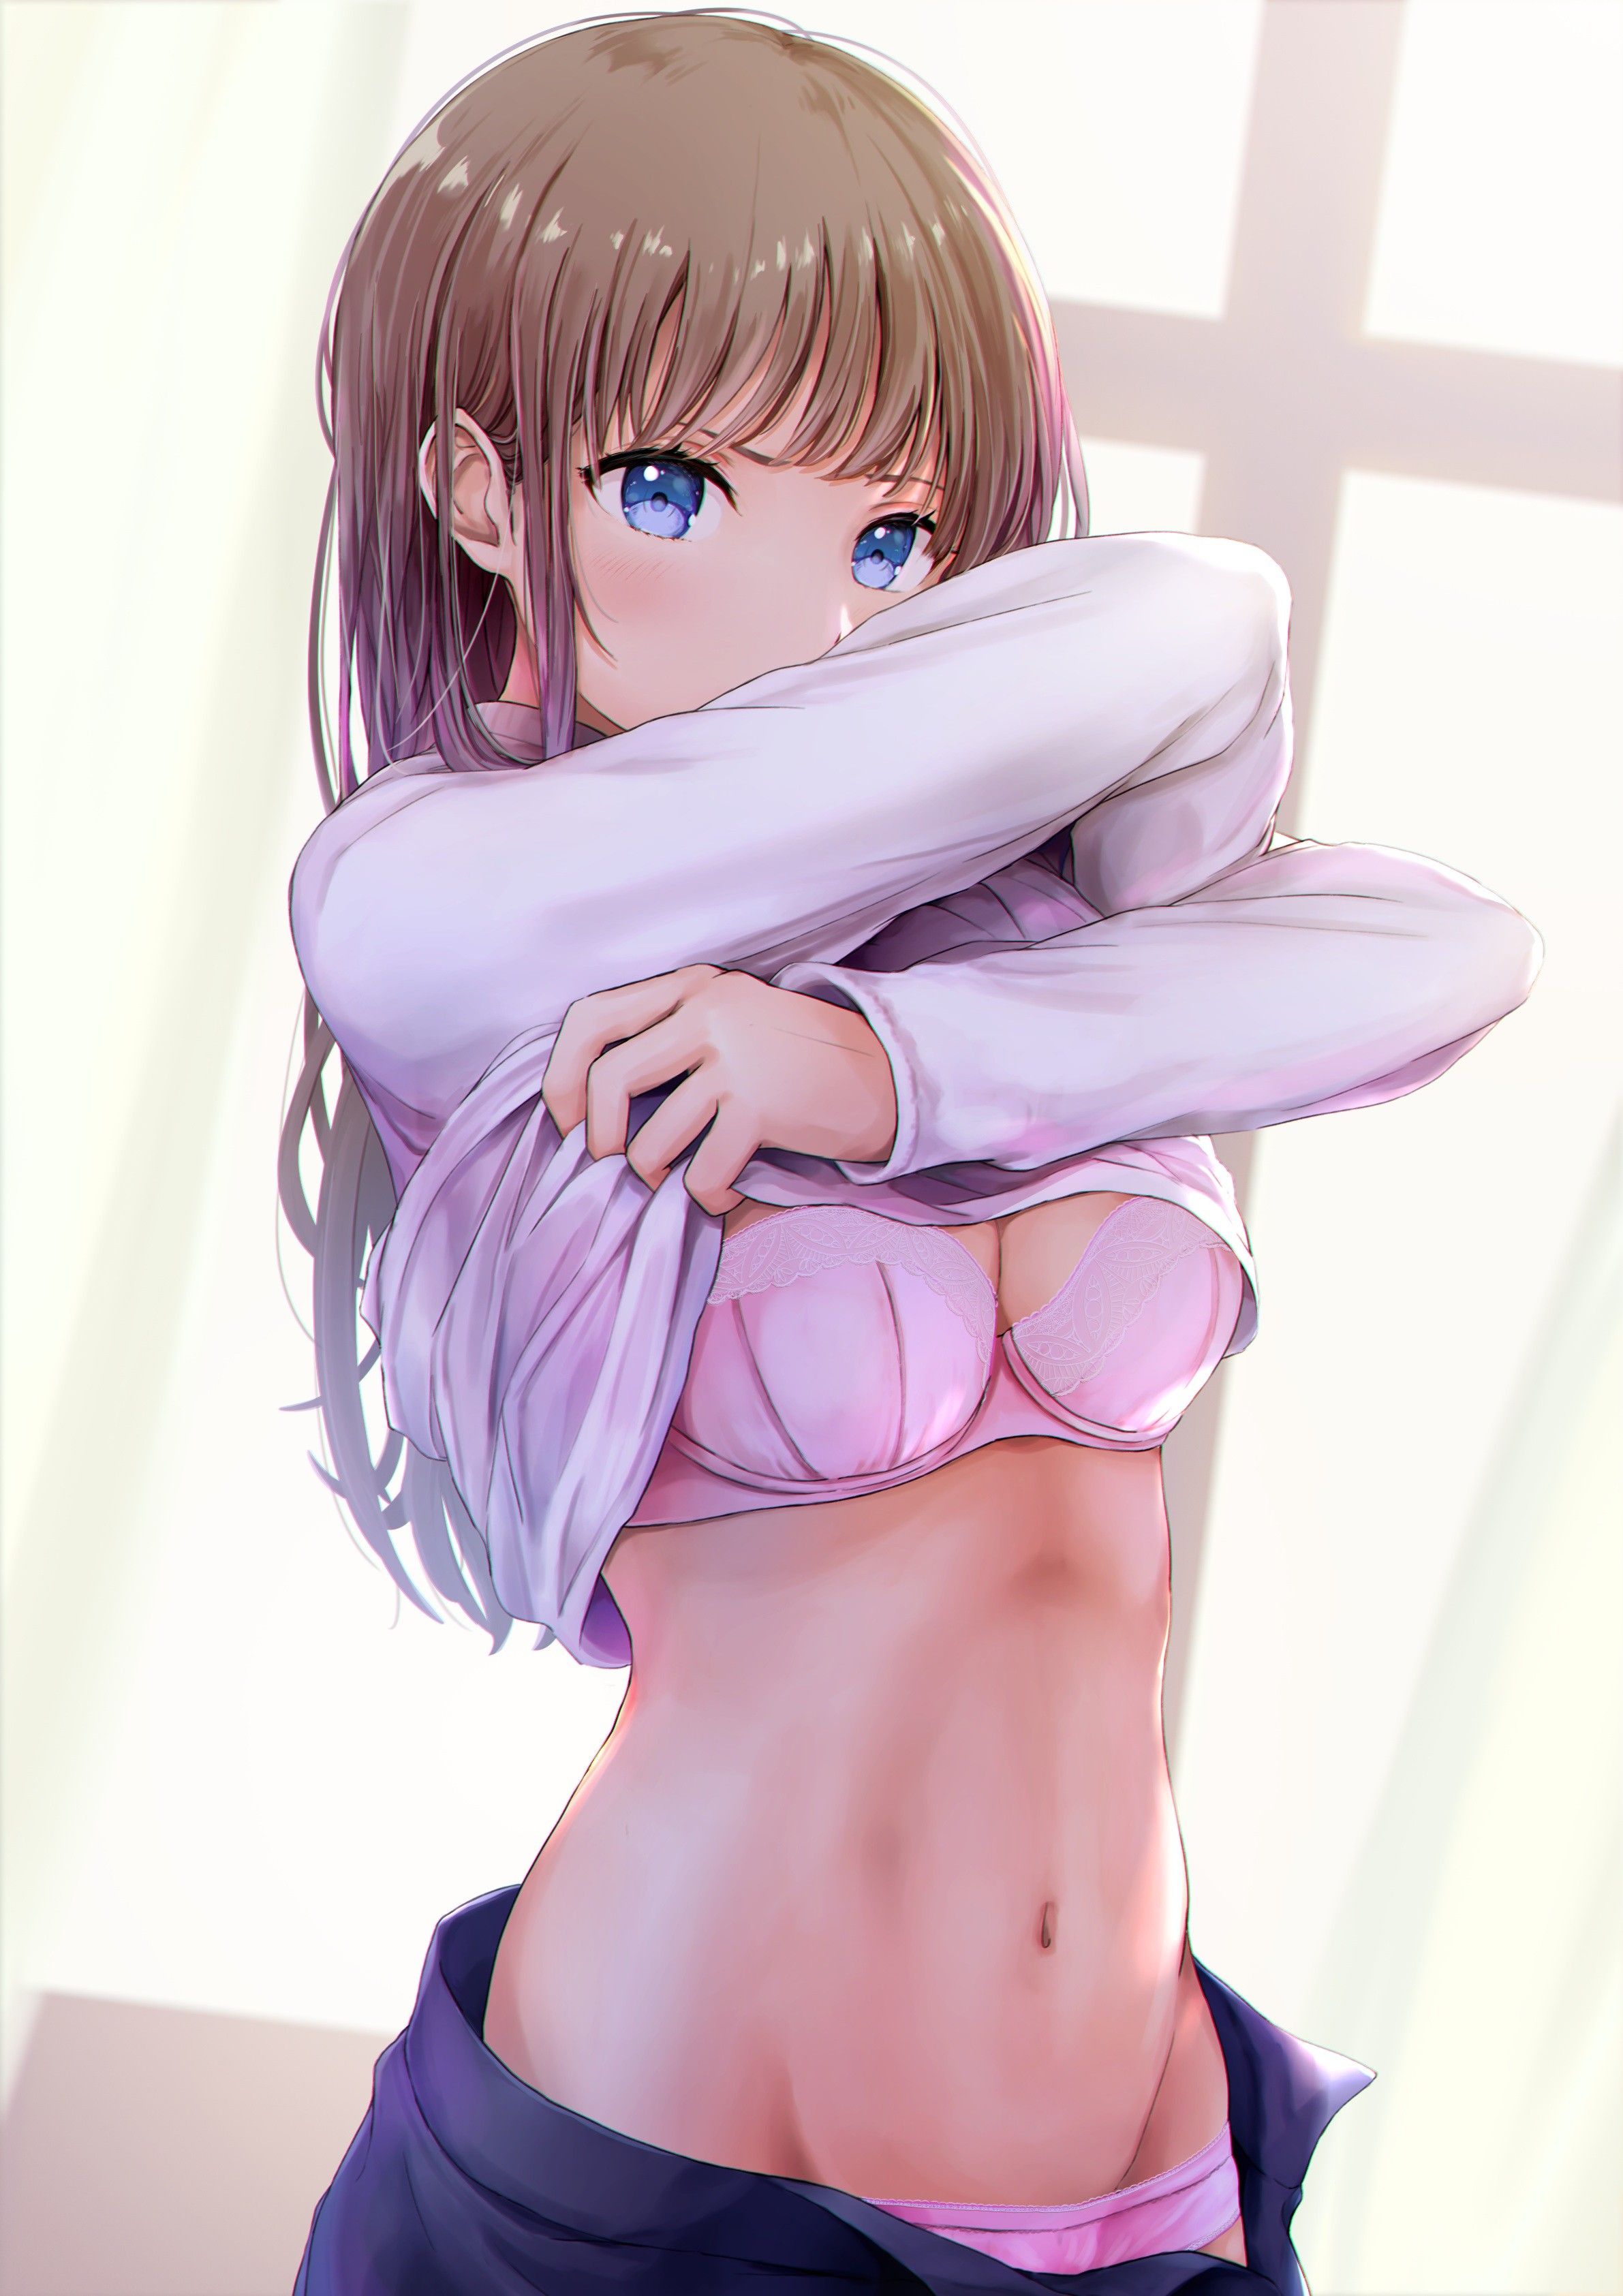 [2nd] Erotic image of a girl with her jacket pulled up and her breasts and bra fully visible Part 52 5